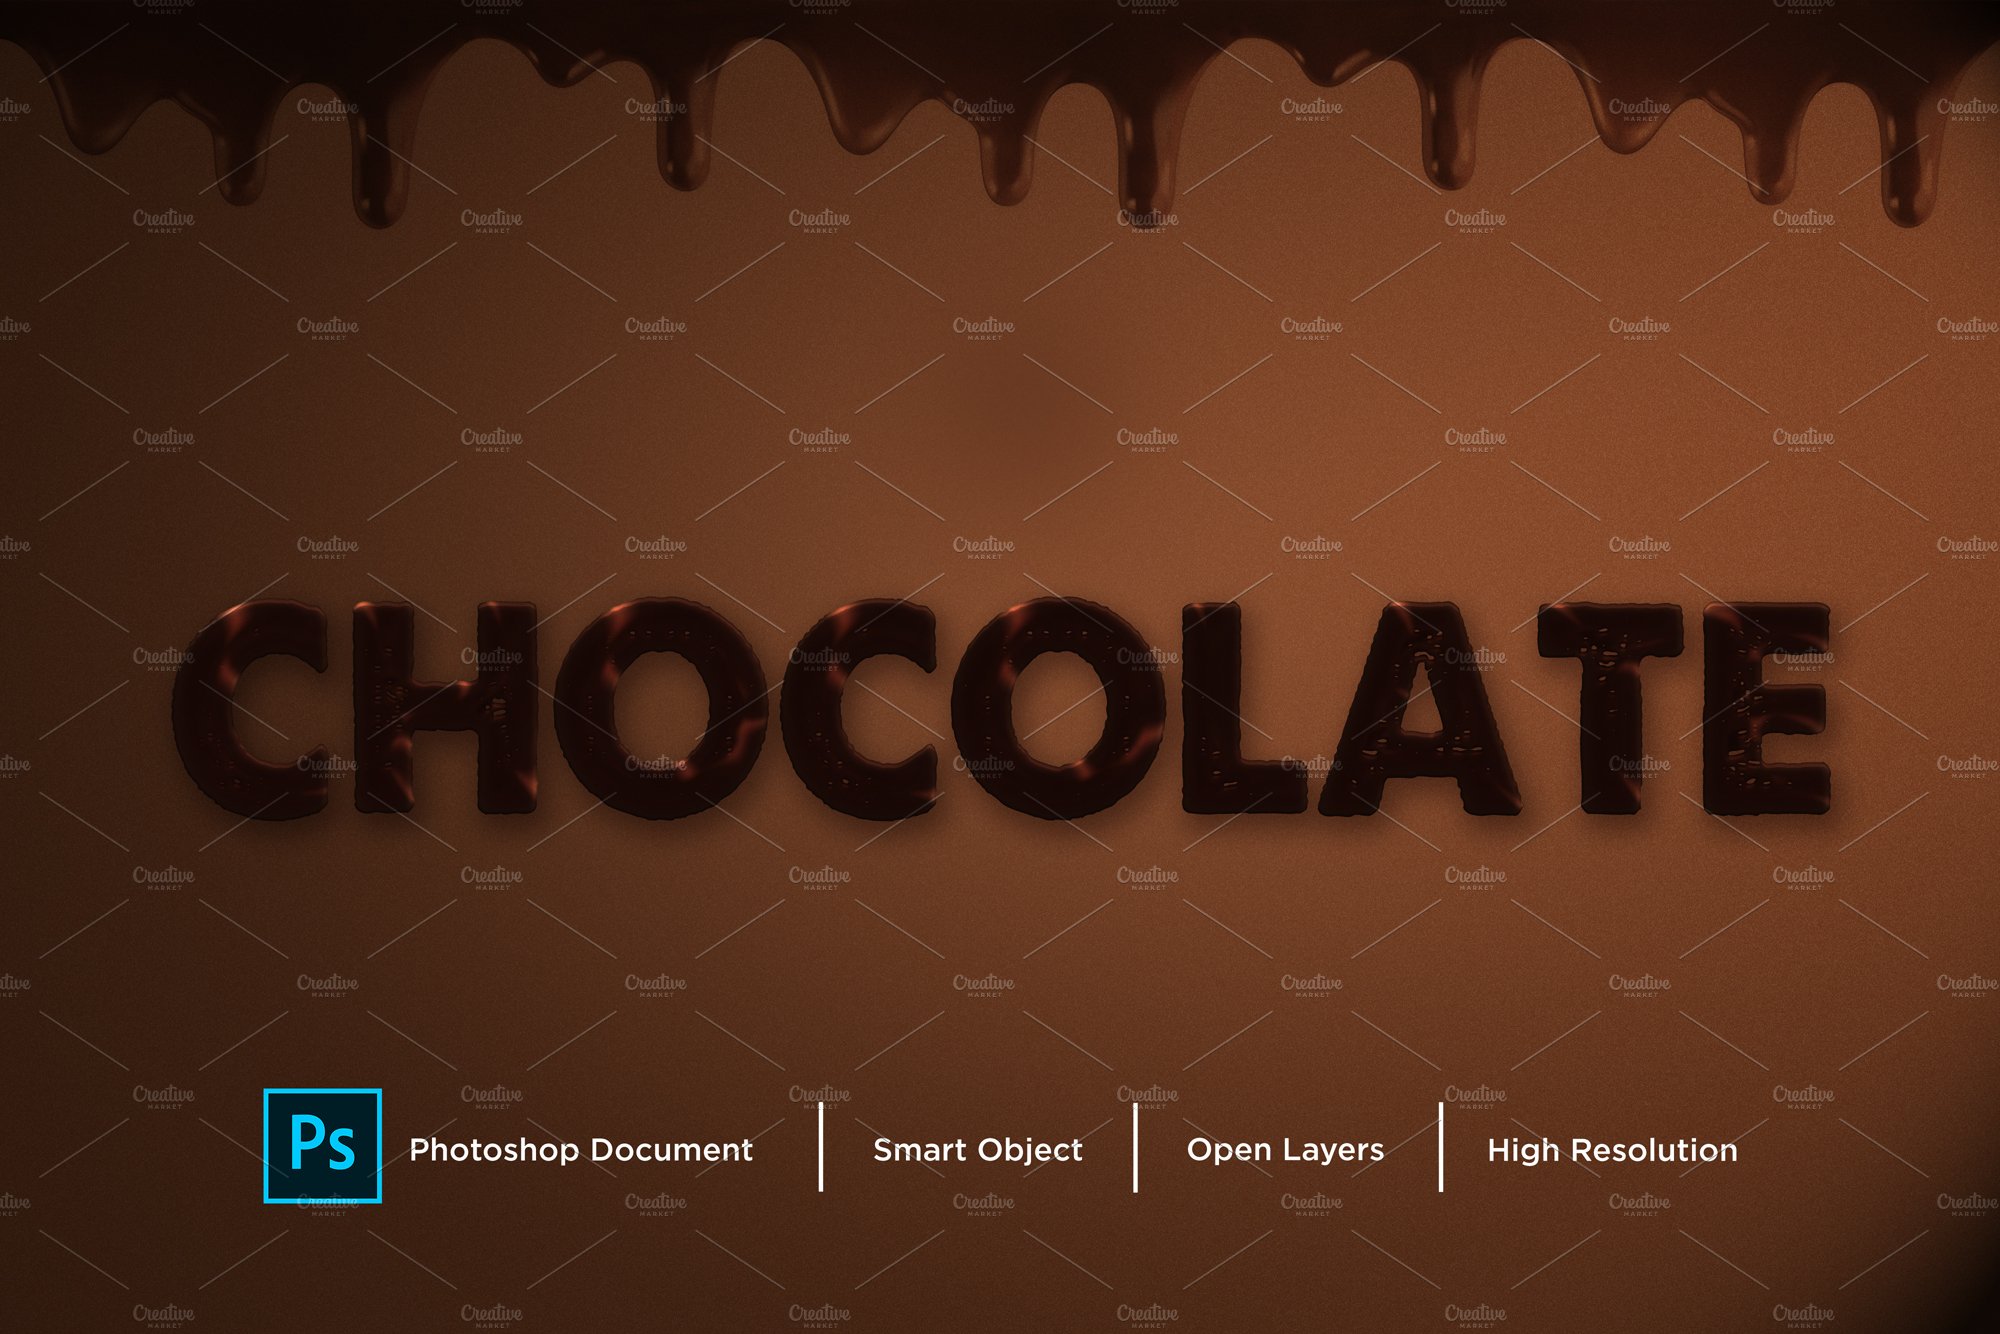 Chocolate Text Effect & Layer Stylecover image.